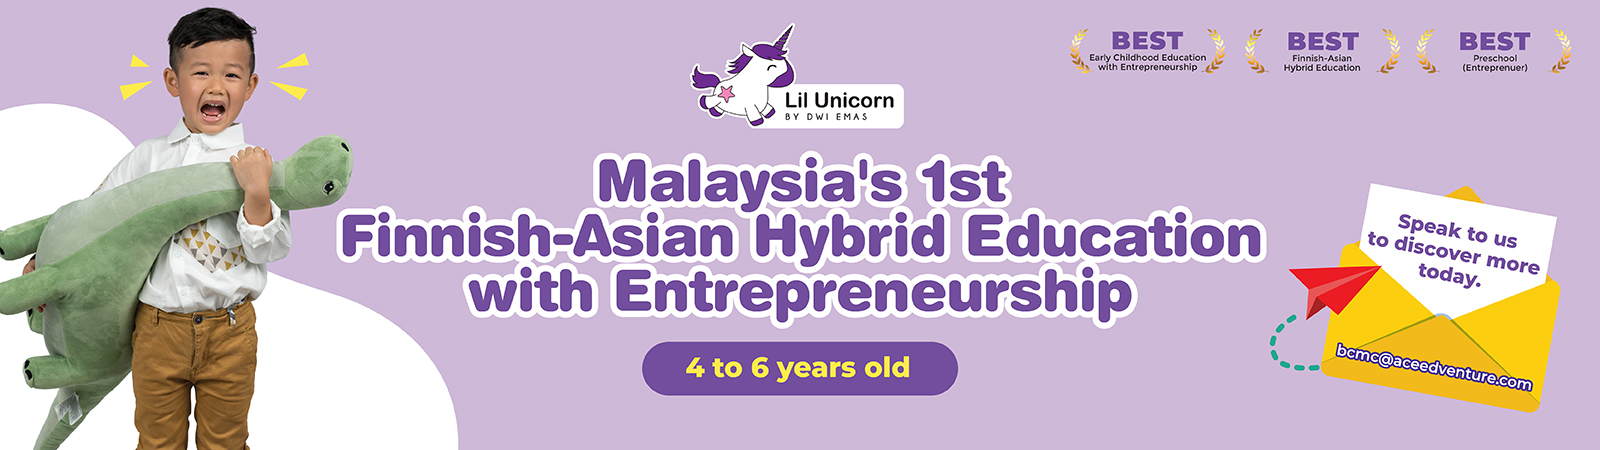 Lil Unicorn Academy: The power of entrepreneurship in early education